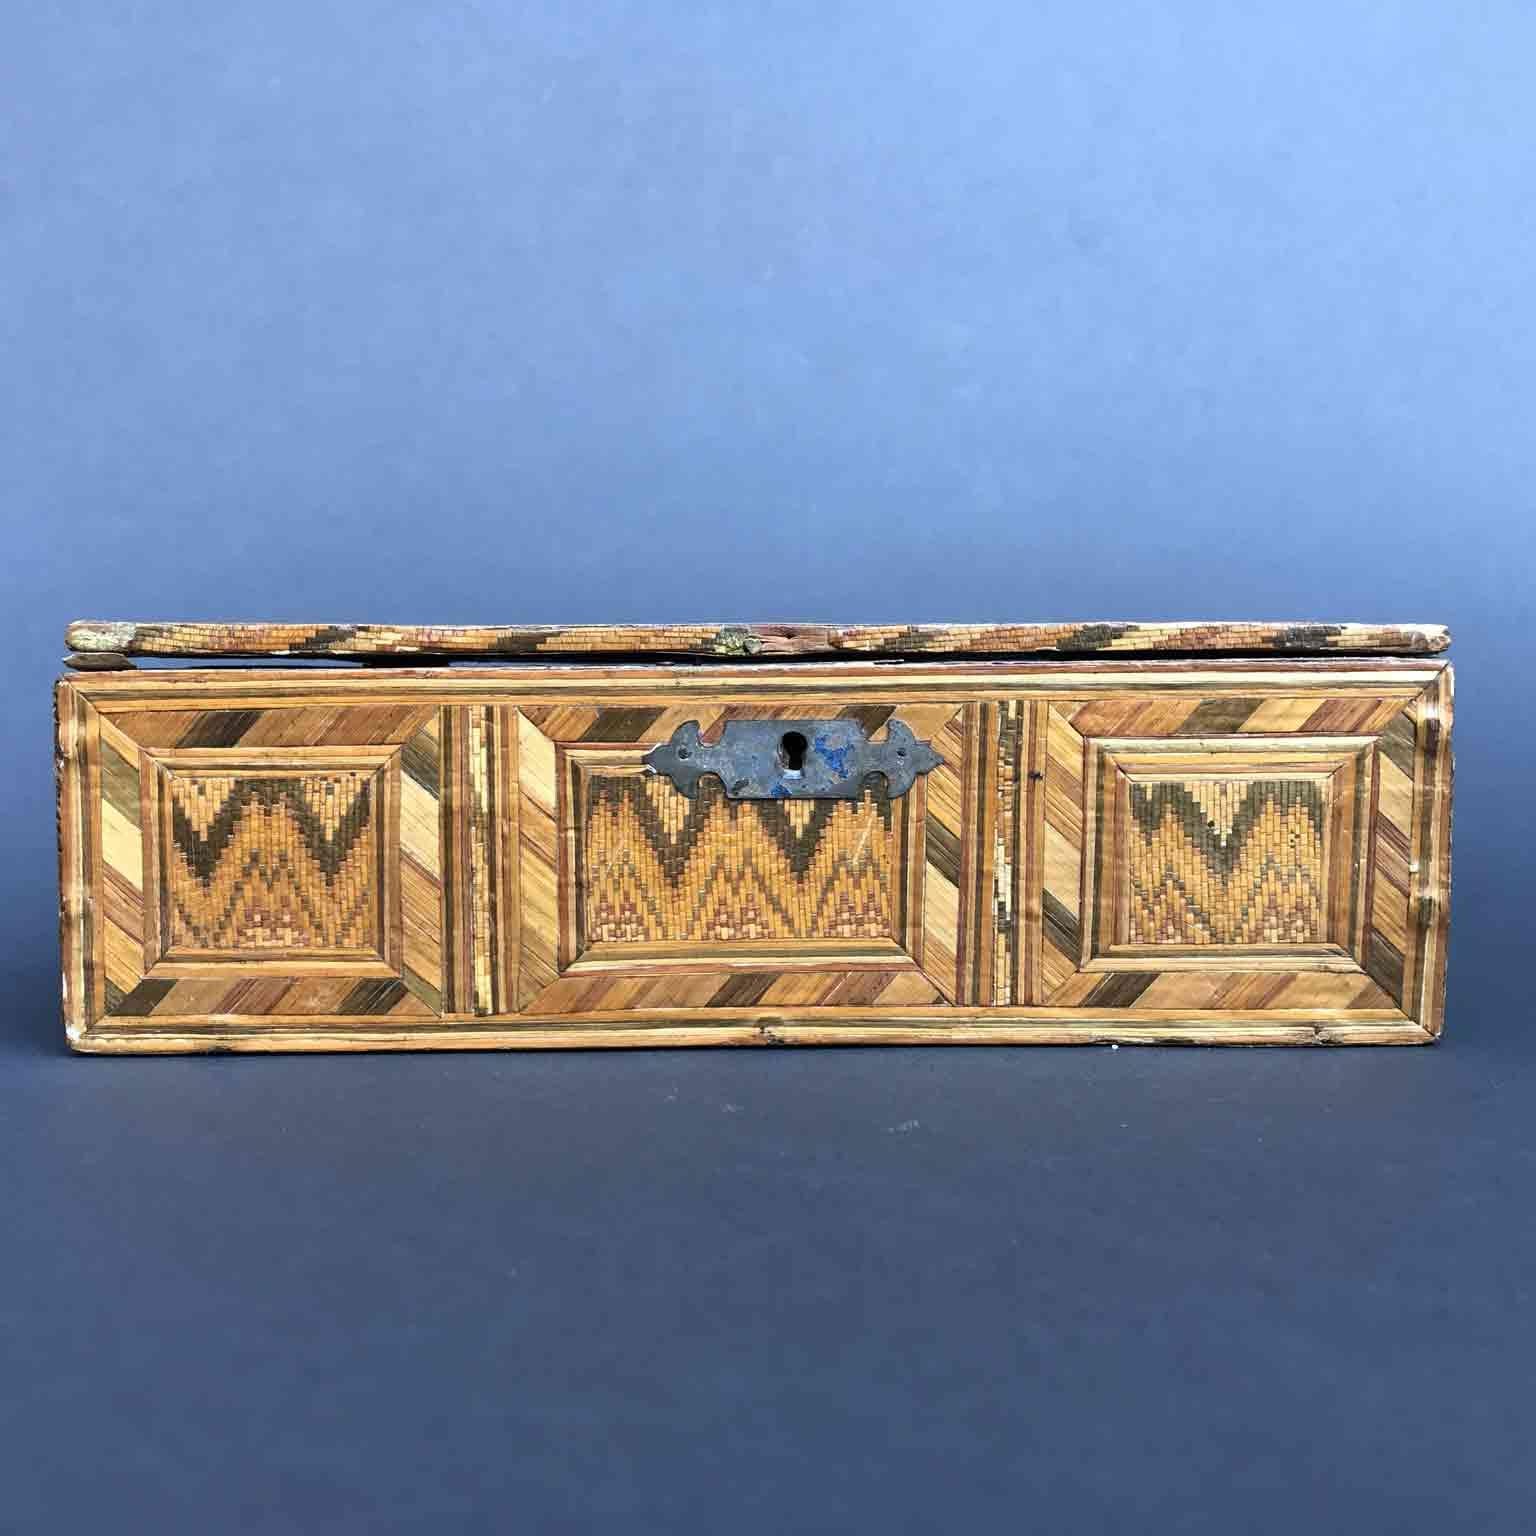 An Italian straw work box decorated everywhere with extraordinary straw-work geometrical marquetry on a wooden structure, coated even inside and at the bottom. 

This Italian box, has a rectangular shape, hand-realized in an antique abbey in